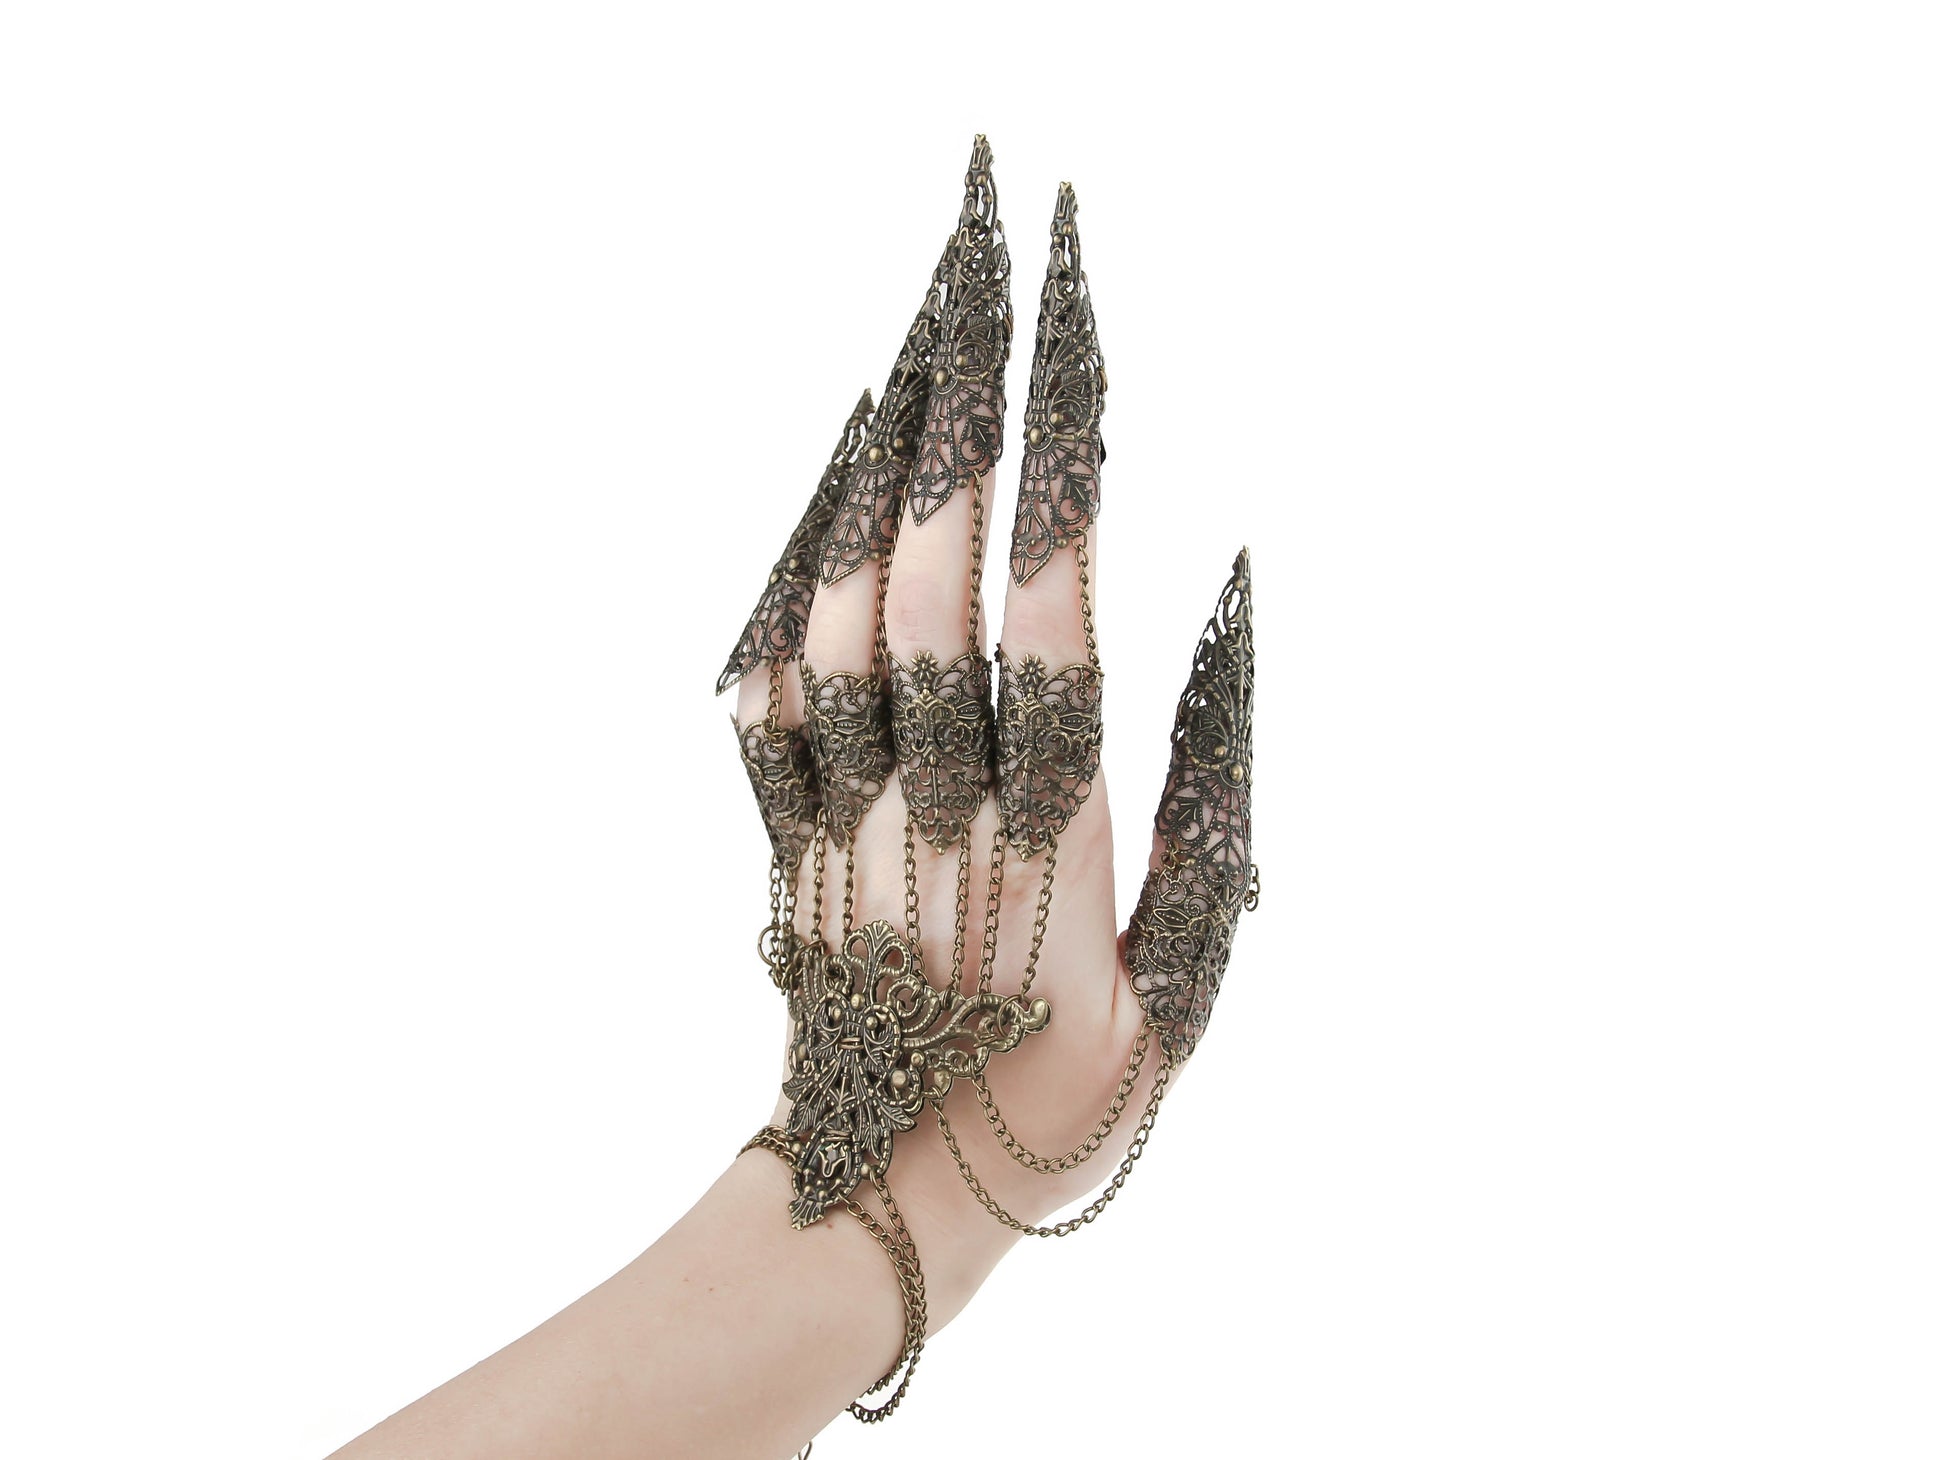 An intricate gothic claw glove crafted with a delicate bronze filigree, epitomizing dark fashion elegance. Each finger extends into a fine, clawed tip, perfect for goth jewelry enthusiasts seeking a dramatic accessory. The glove's chain links and lace-patterned metalwork enhance its ornate appeal.